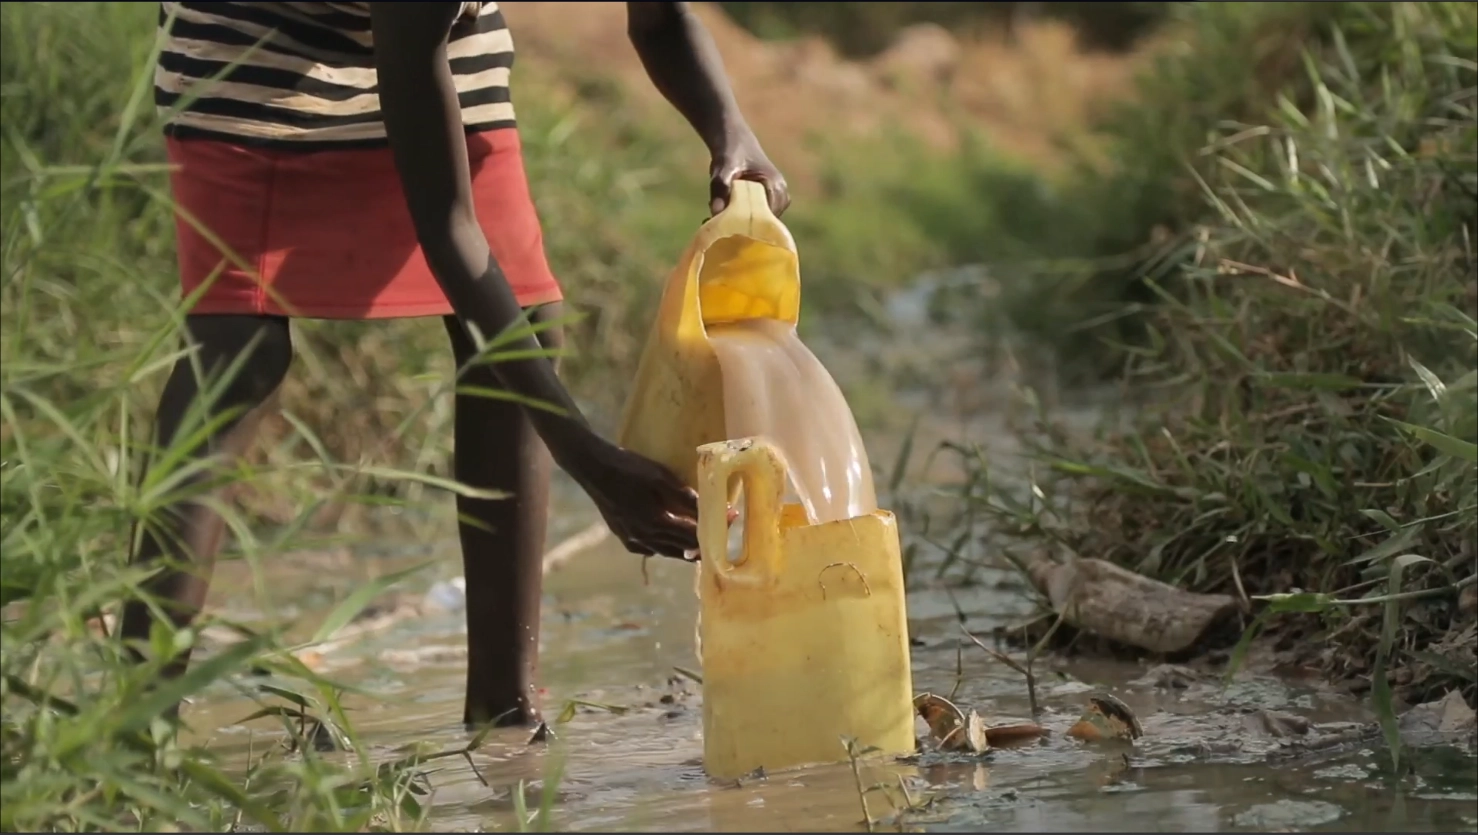 EcoH2O Video Image Overlay - Child pouring dirty water into a plastic yellow makeshift container.